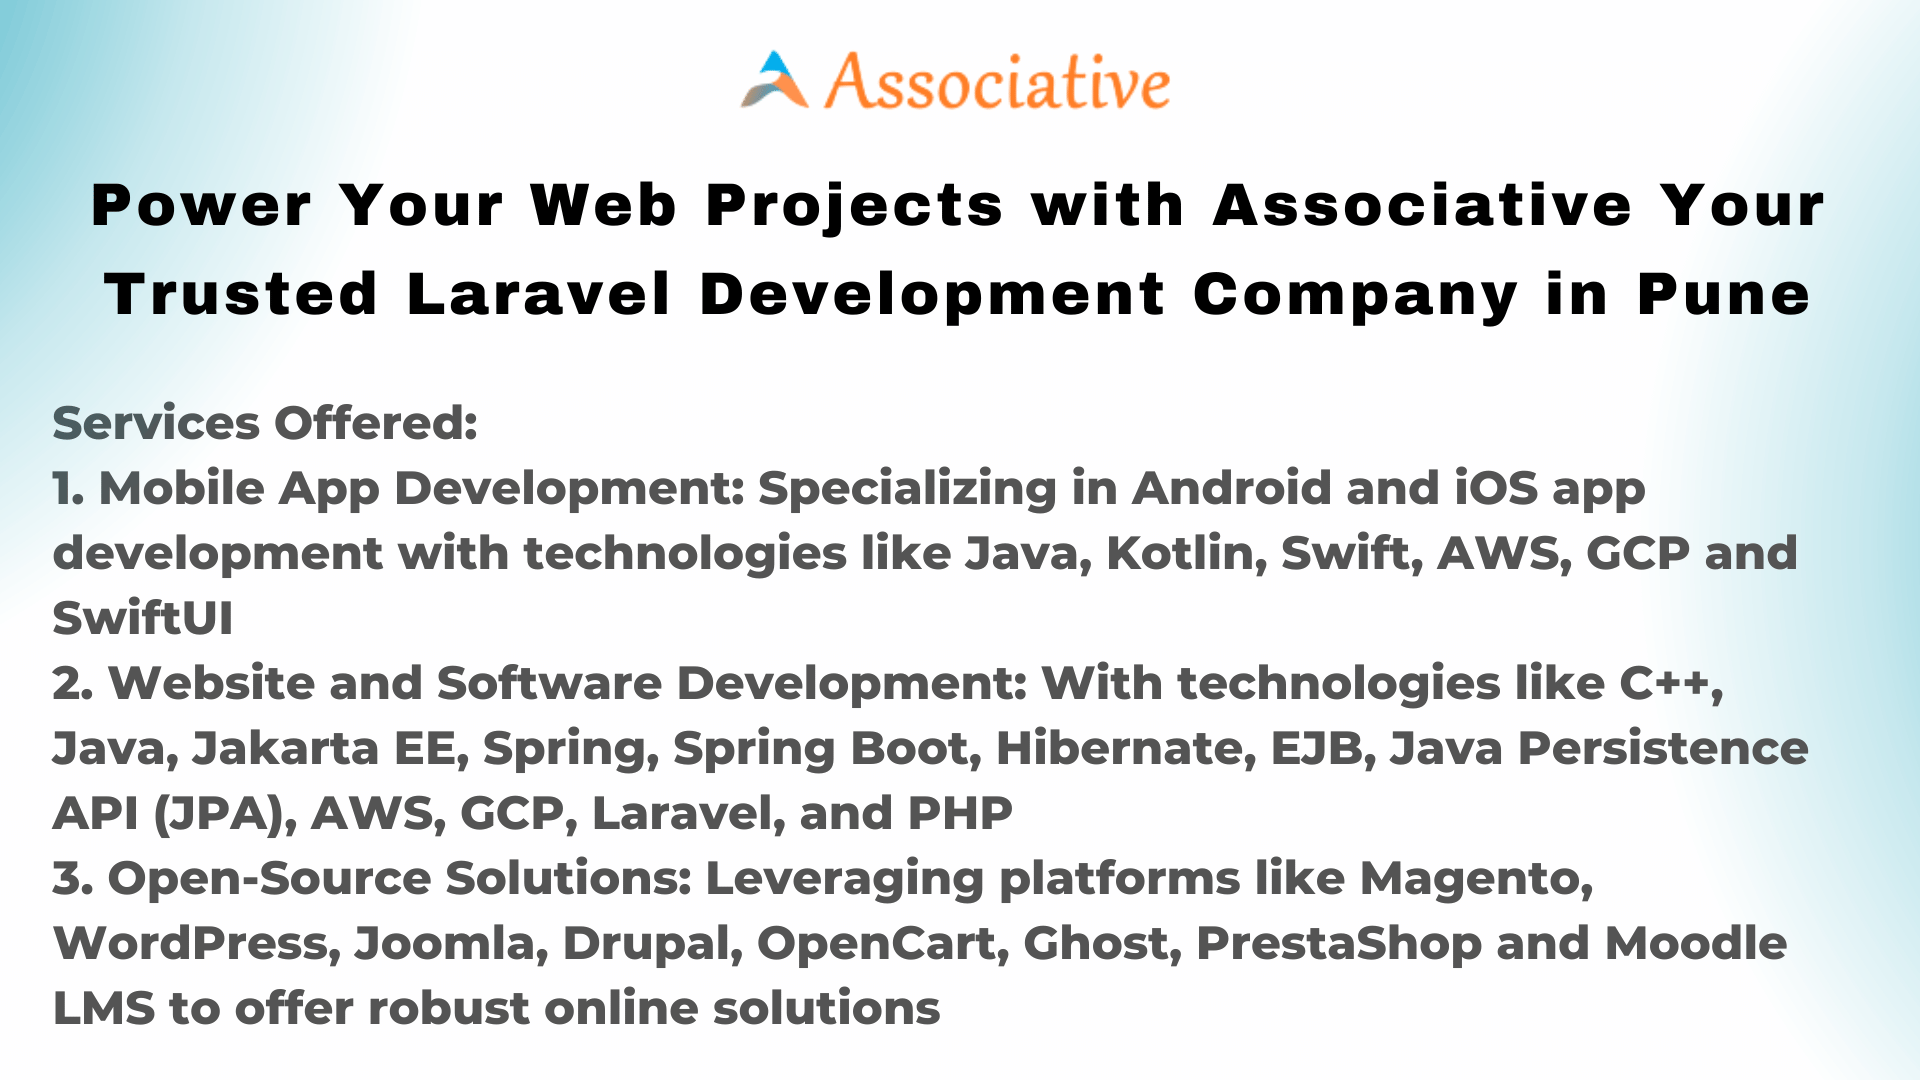 Power Your Web Projects with Associative Your Trusted Laravel Development Company in Pune